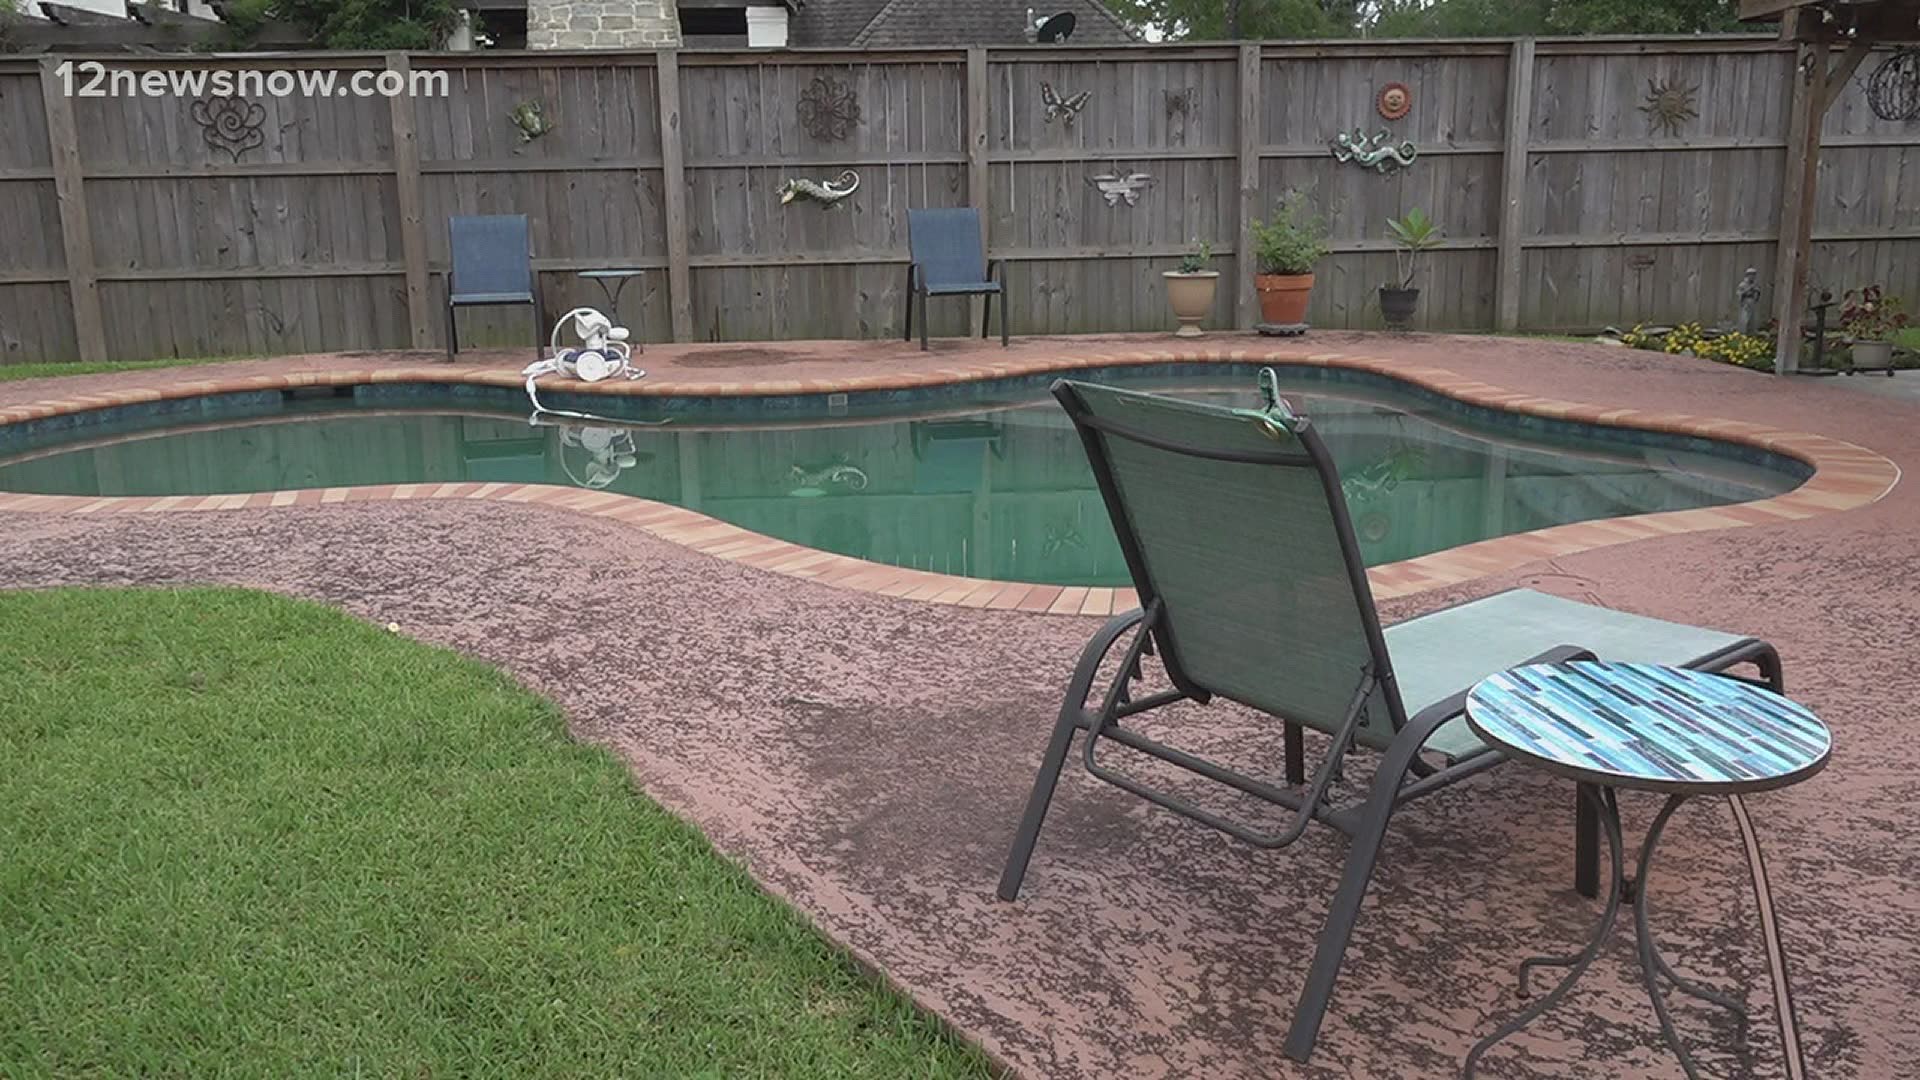 Pool equipment, chemical supply shortages in Southeast Texas 12newsnow